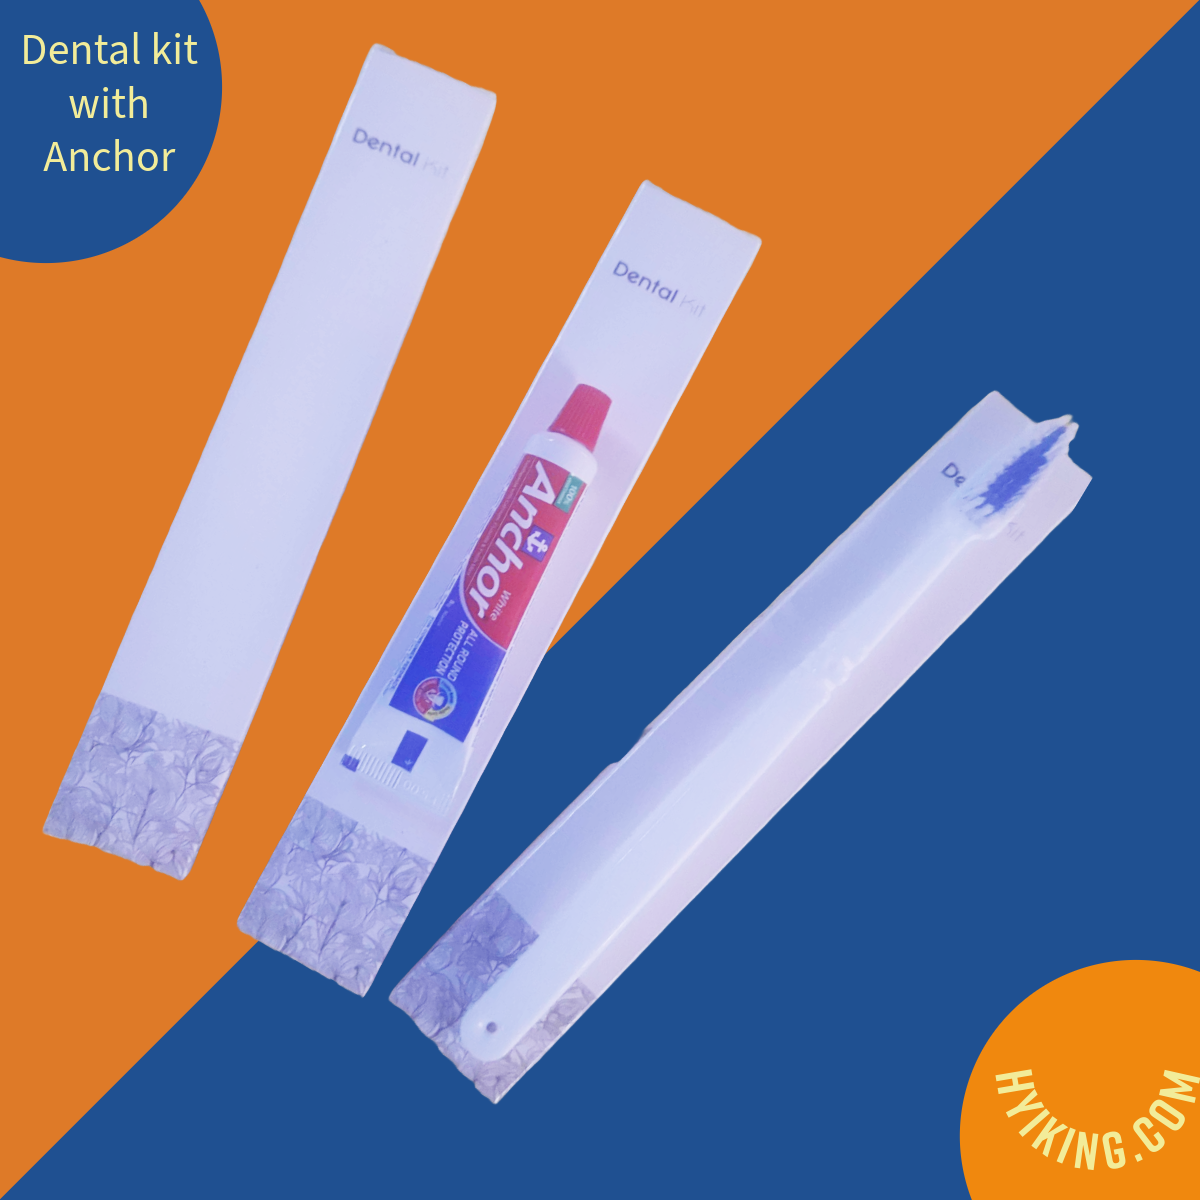 Hotel Use Dental Kit with Anchor Toothpaste-48 set- for Hotel Resorts and Home stays